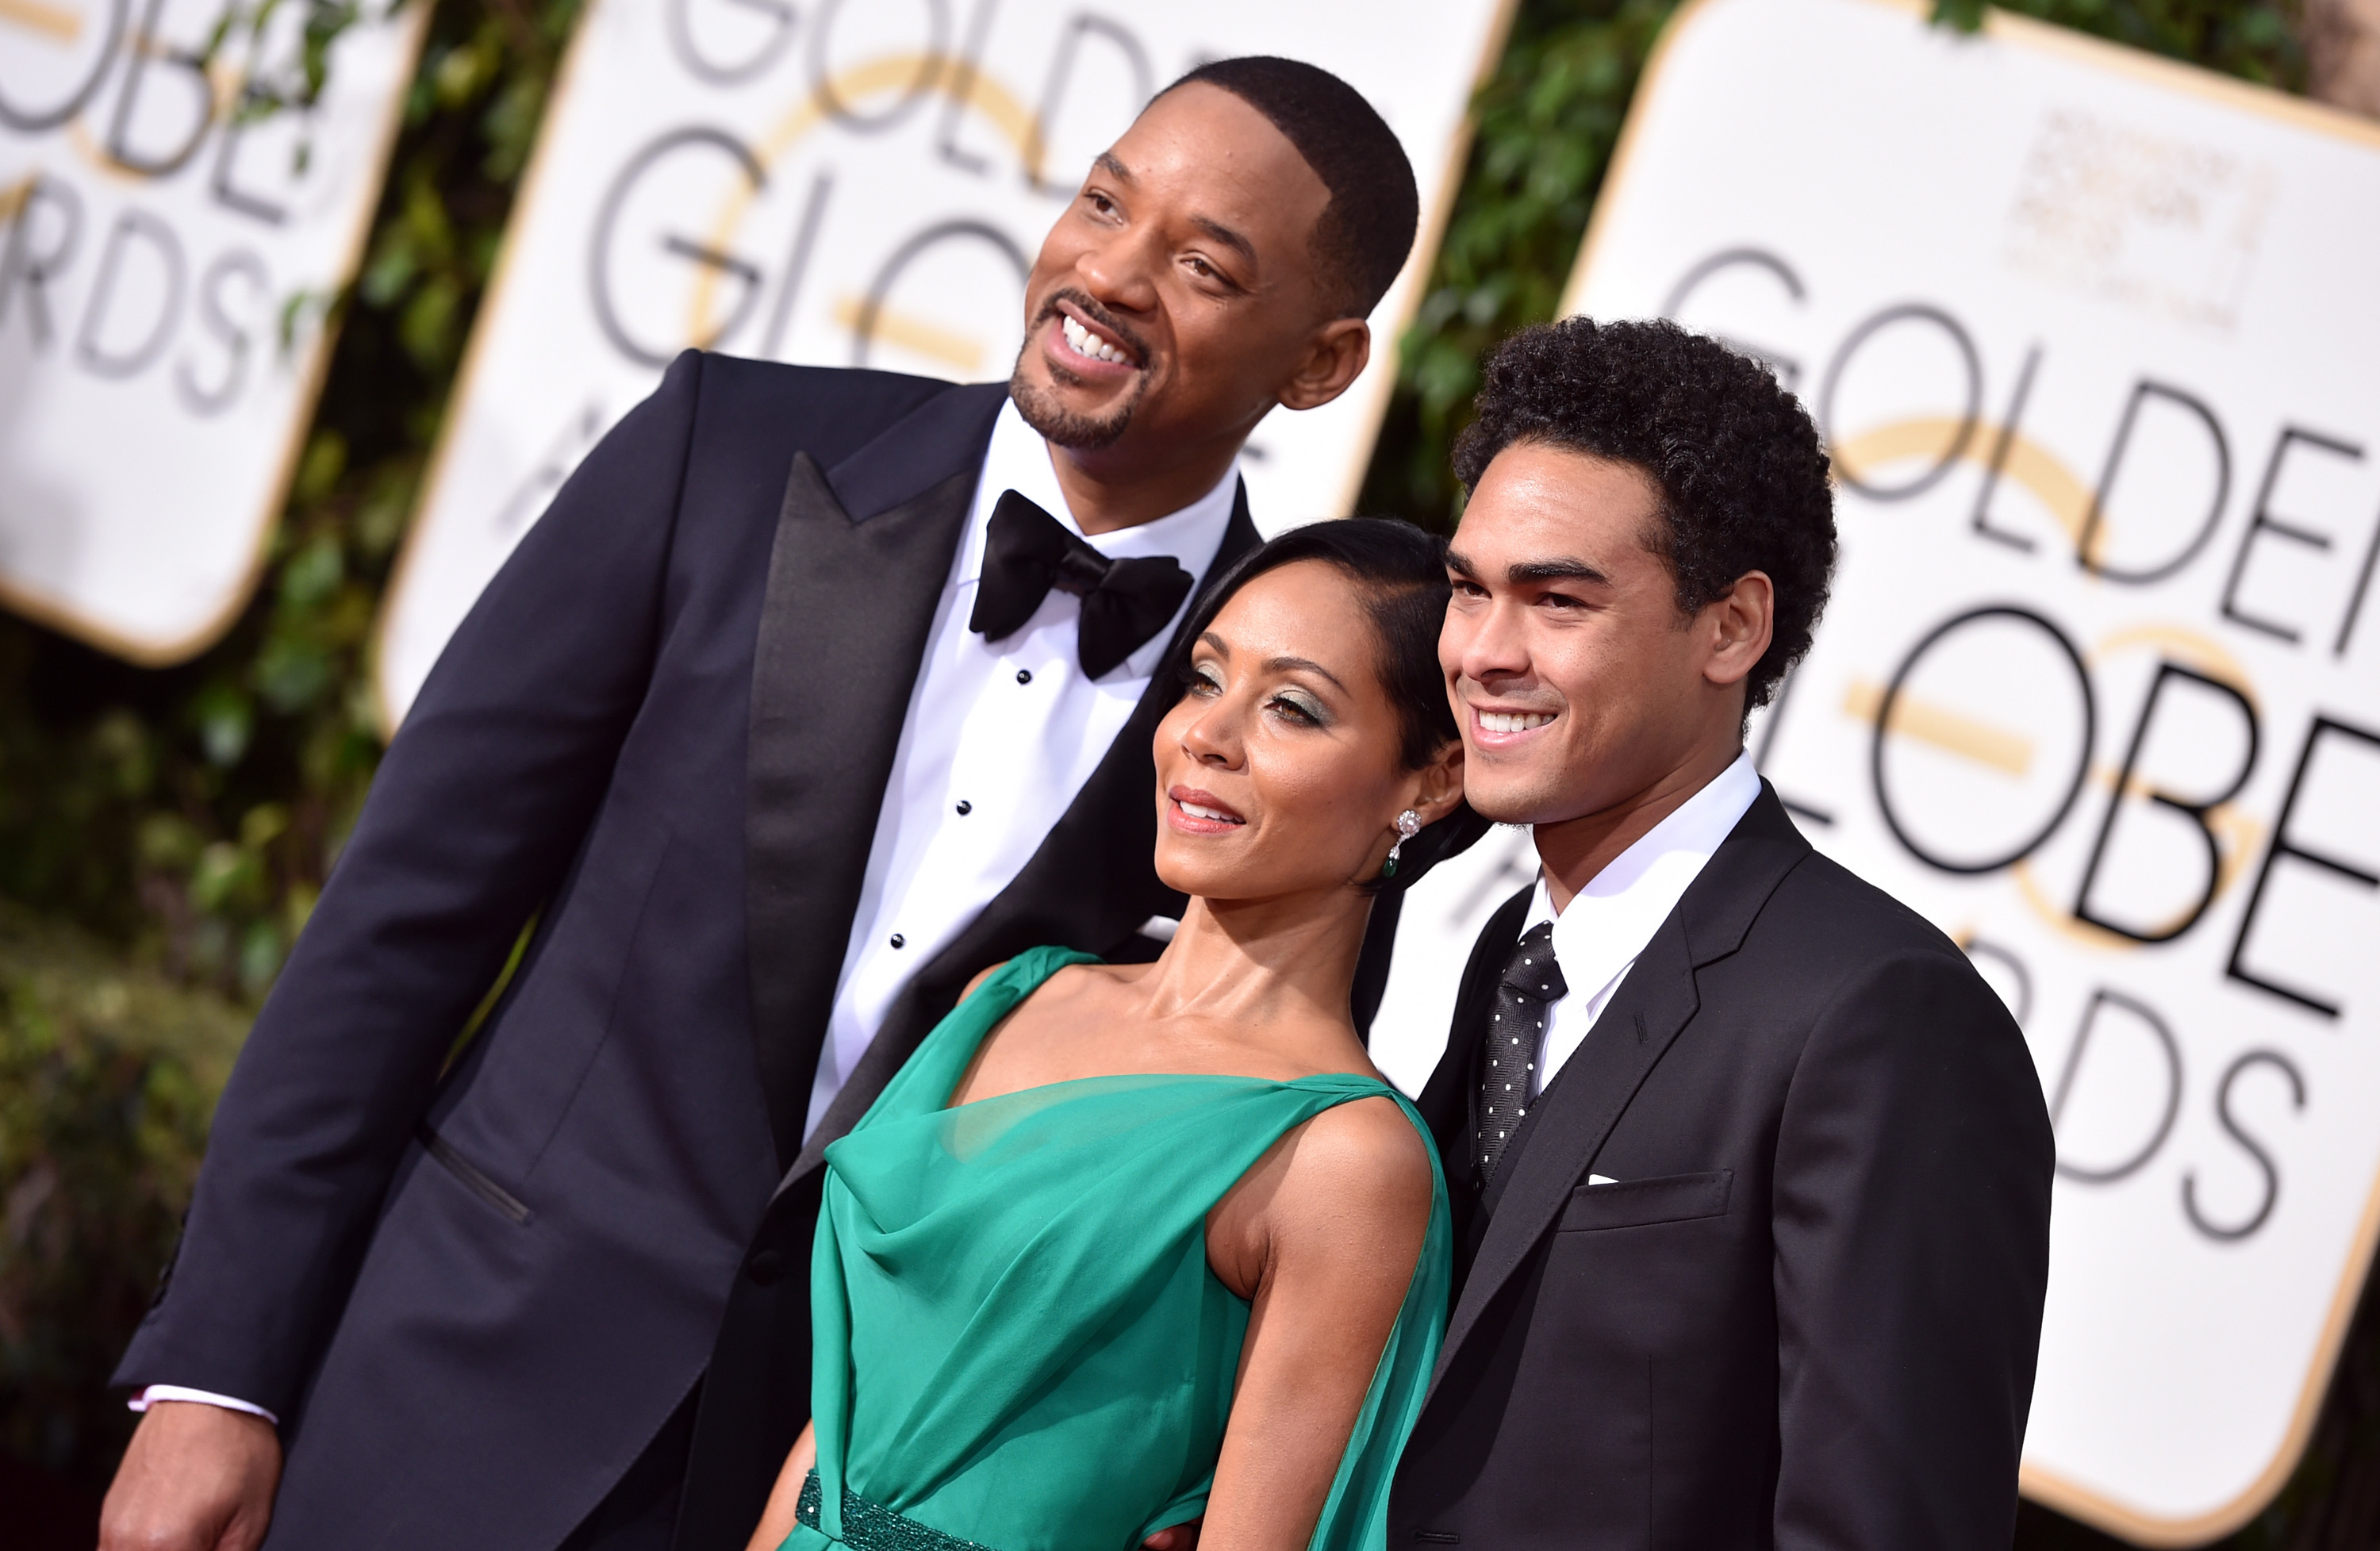 Trey Smith with Will and Jada at the Golden Globes in 2016